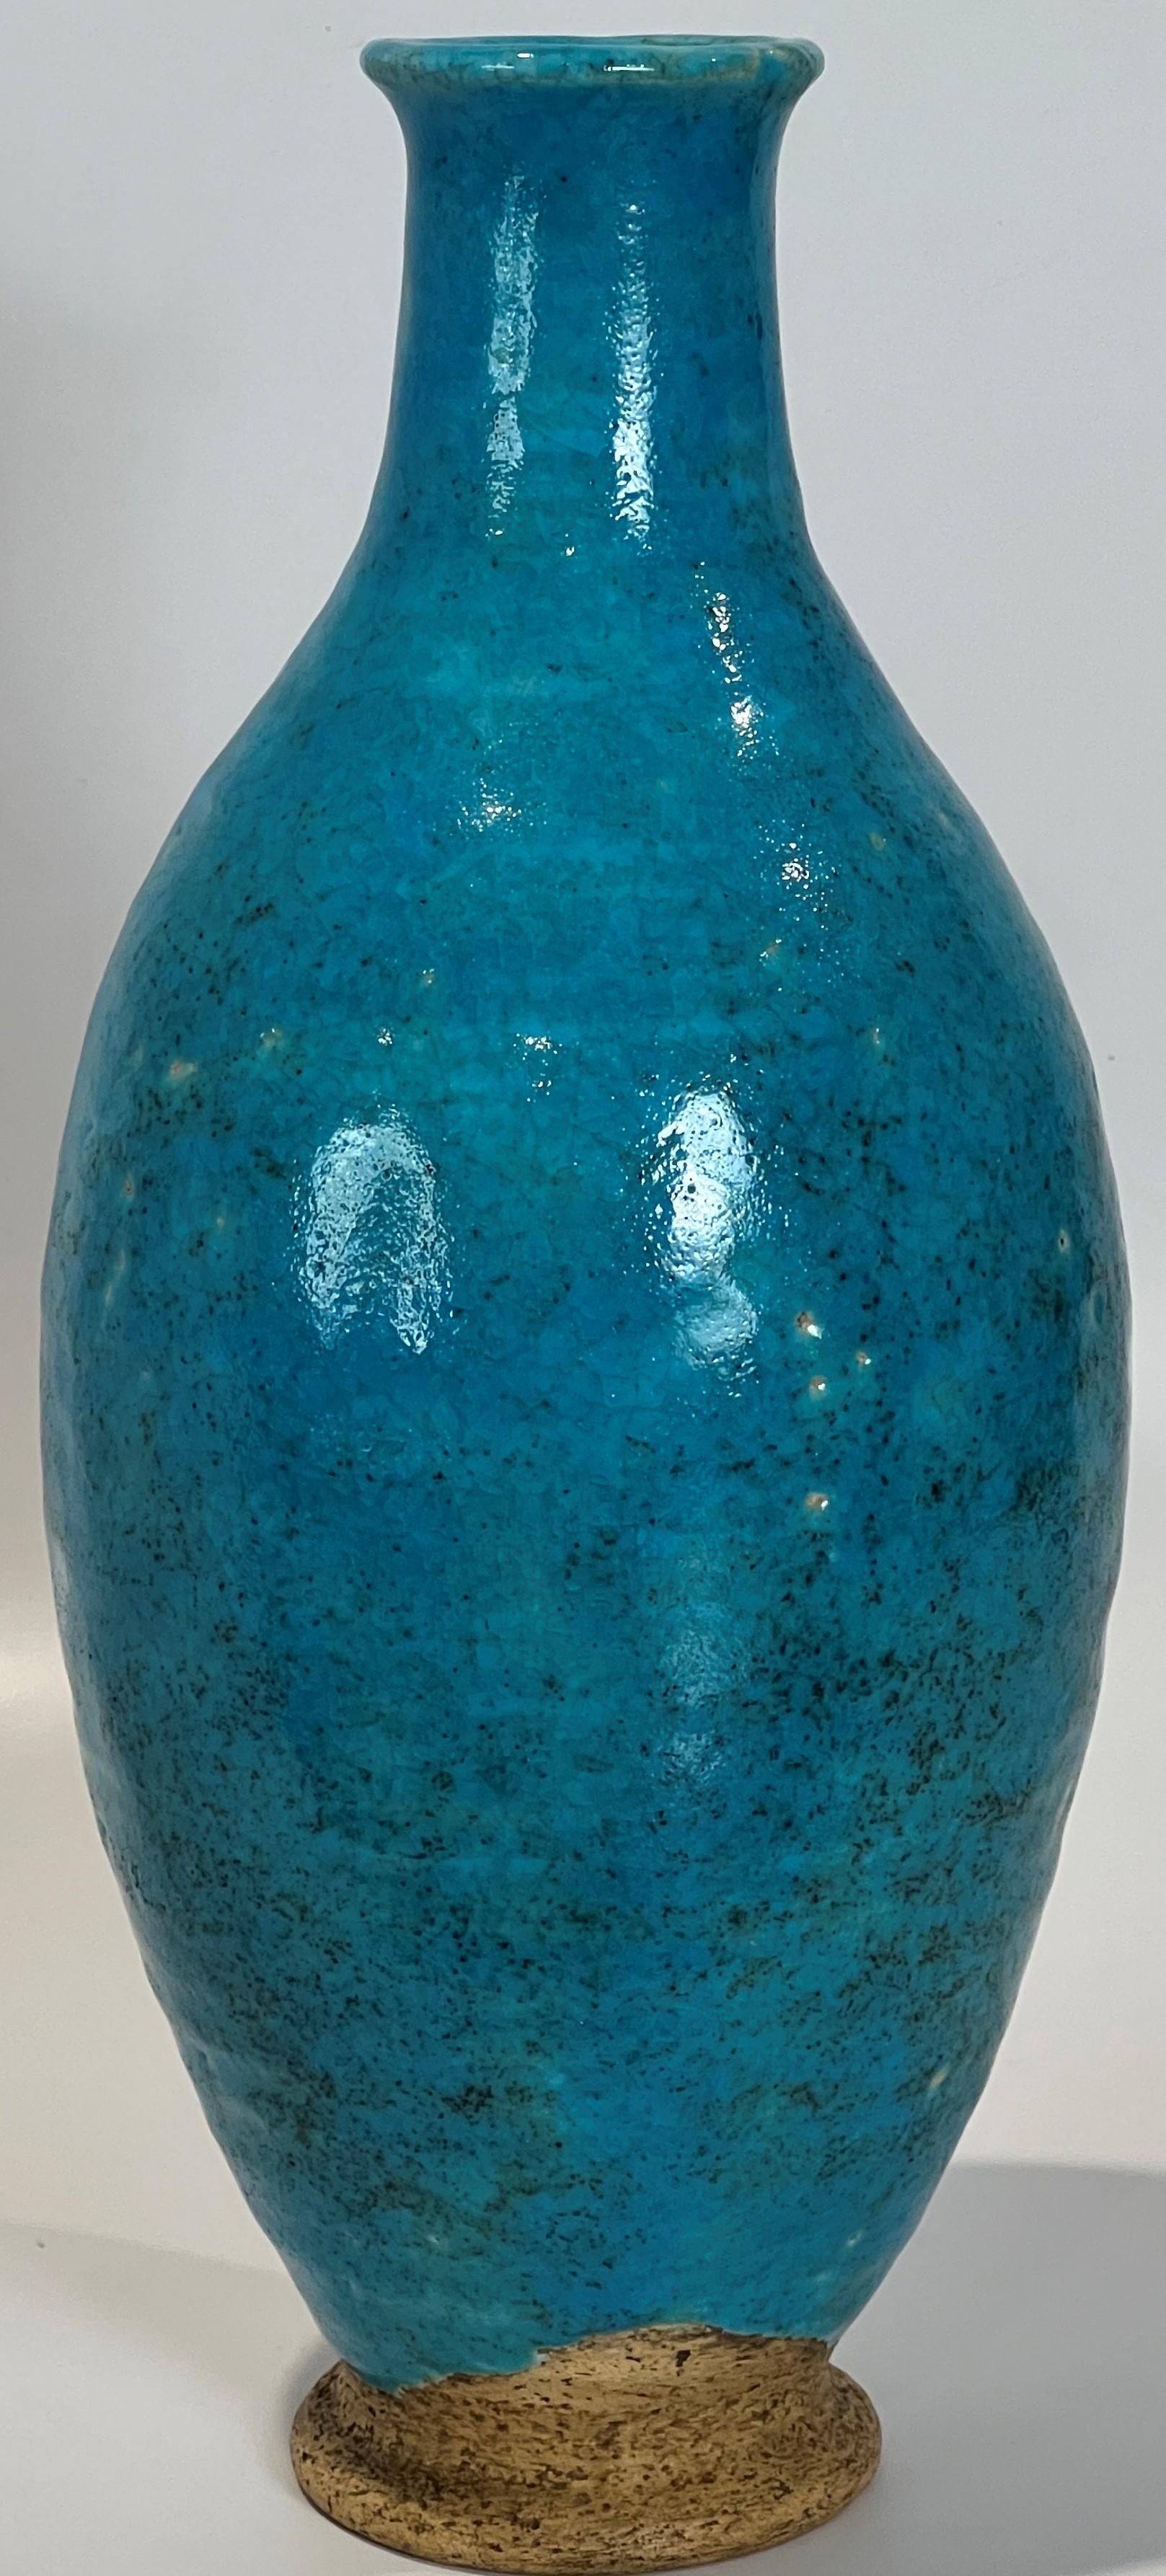 Leon Volkmar established Durant Kilns in Bedford Village Westchester County New York in 1910. His experiments led to his version of an Egyptian Faience glaze and was celebrated nationally. Dated 1916, this is a relatively early and large successful